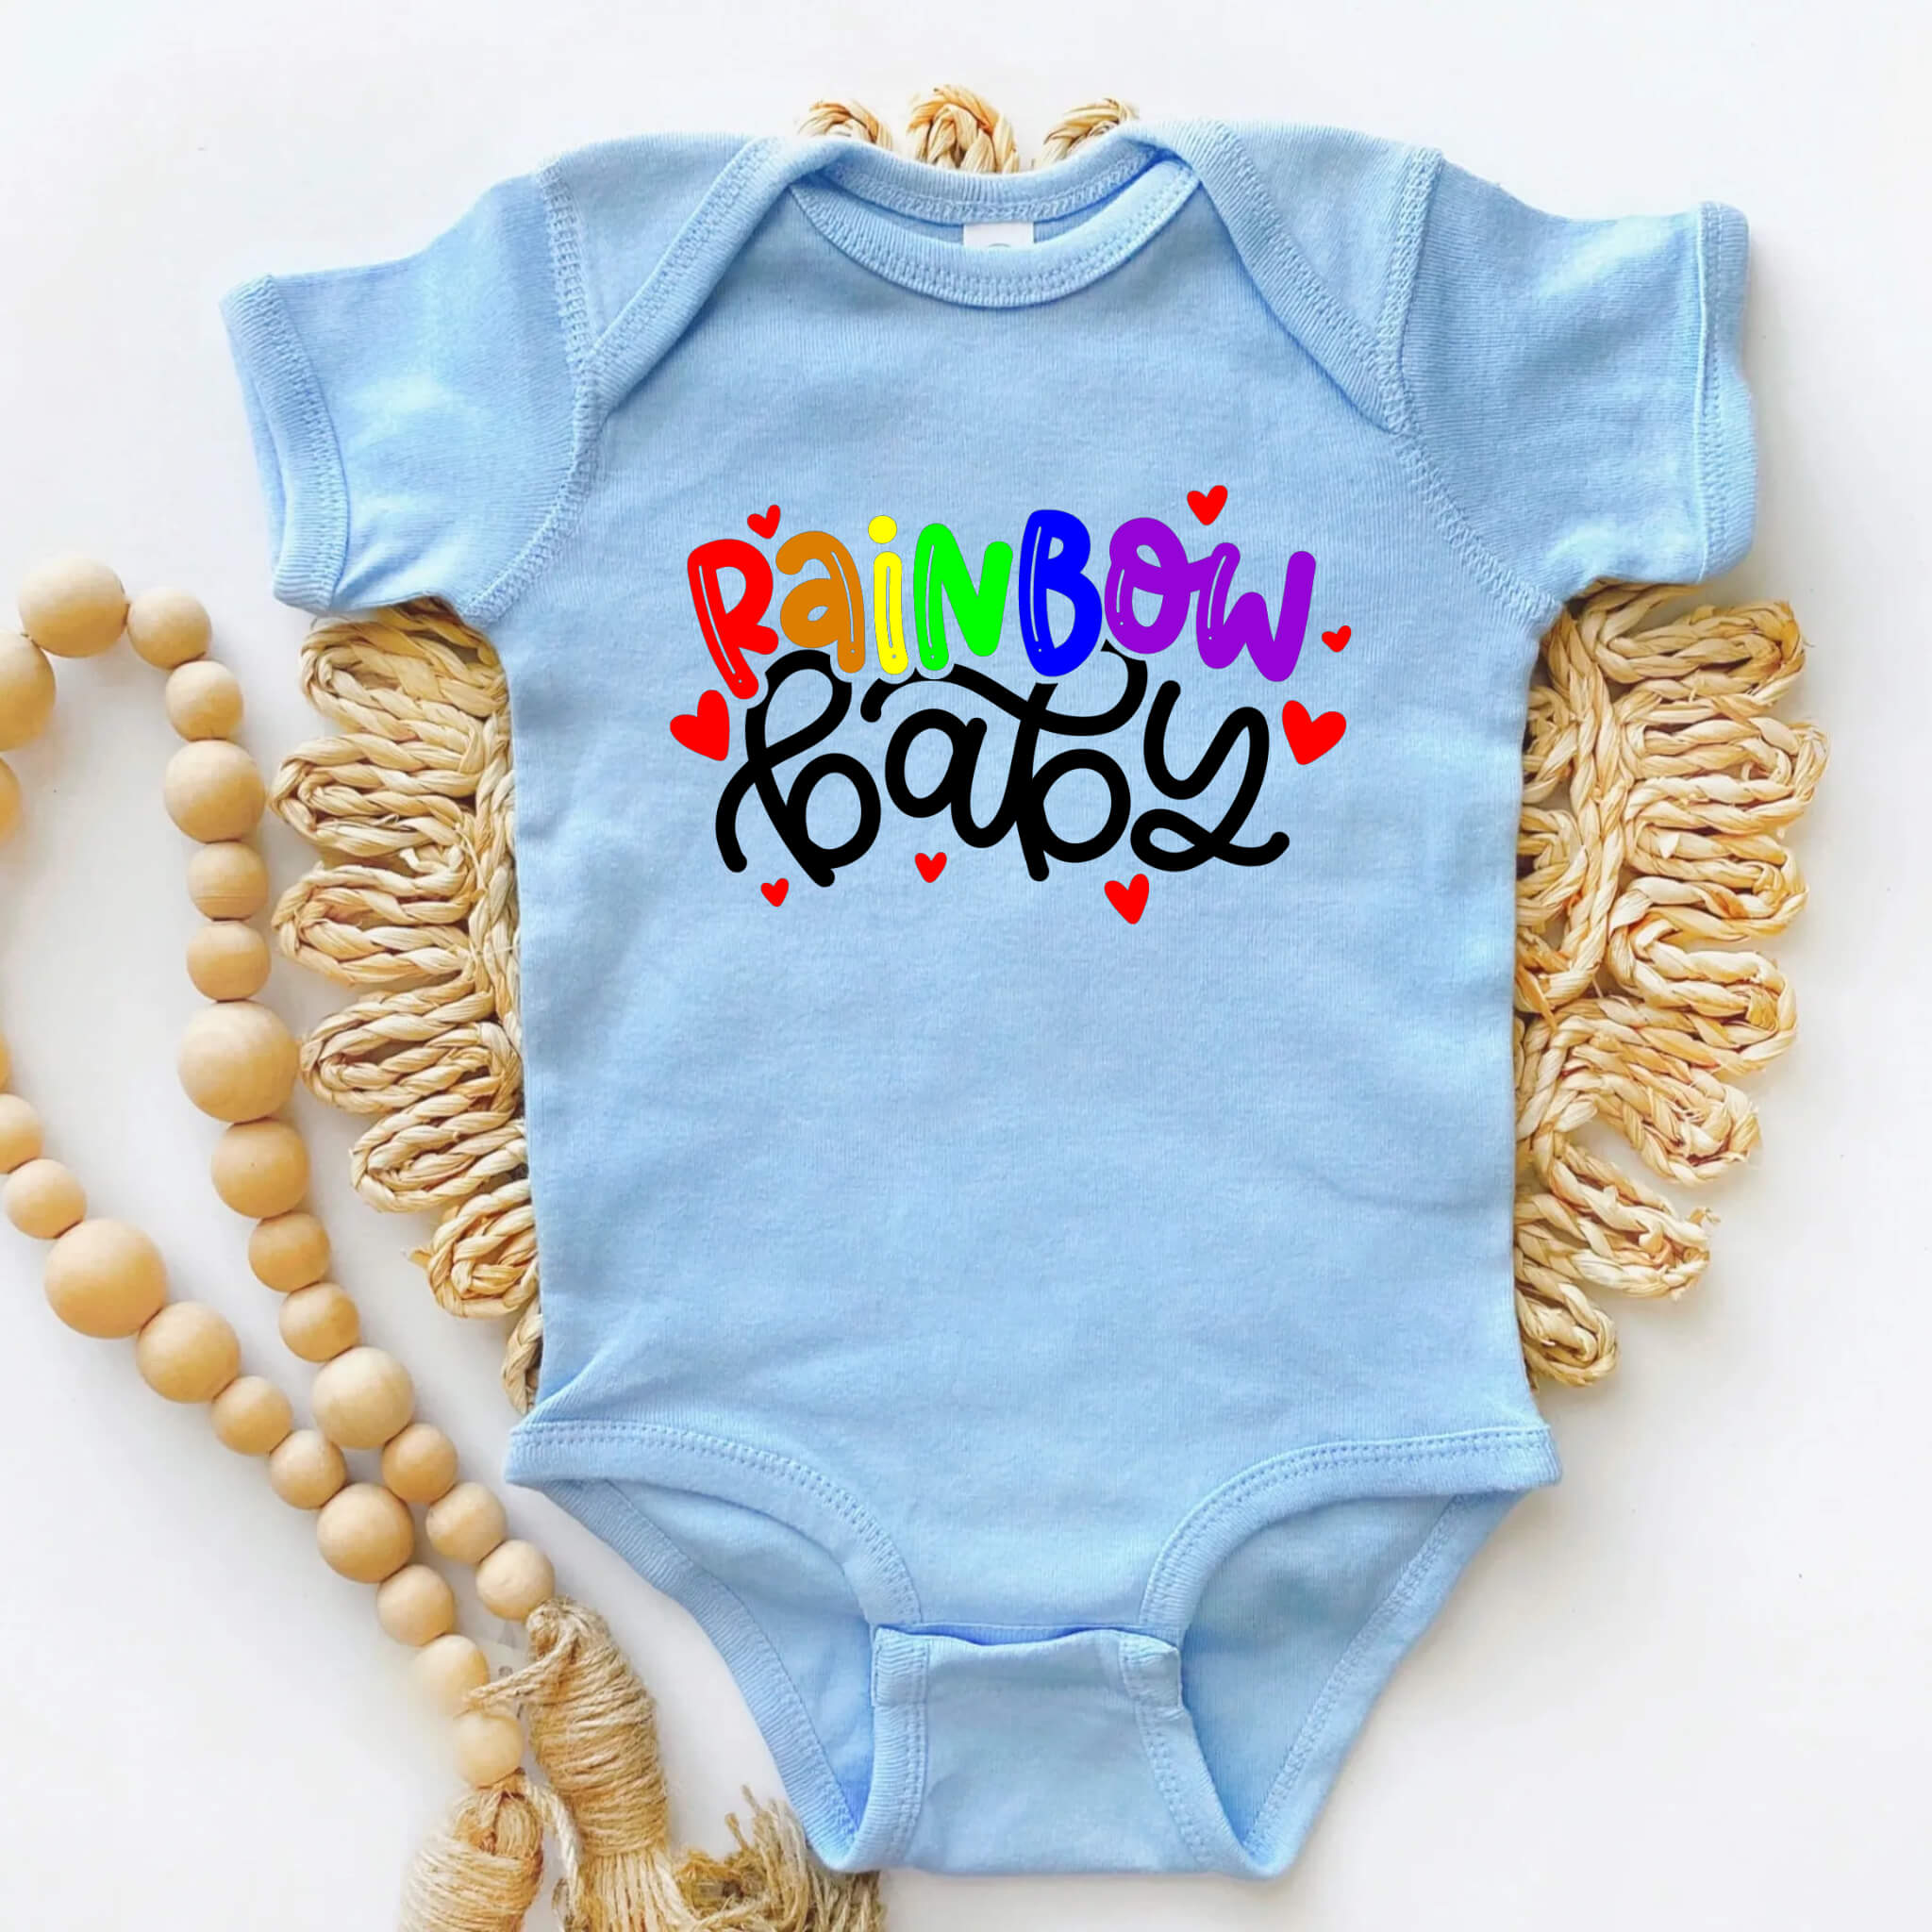 New Baby Onesie, Rainbow Baby Onesie Outfit, Baby Bodysuit, Boy’s, Girl’s Baby Shower Gift, New Baby Take Home Outfit, Maternity Photo Prop Onesie, Grateful Baby Onesie Outfit